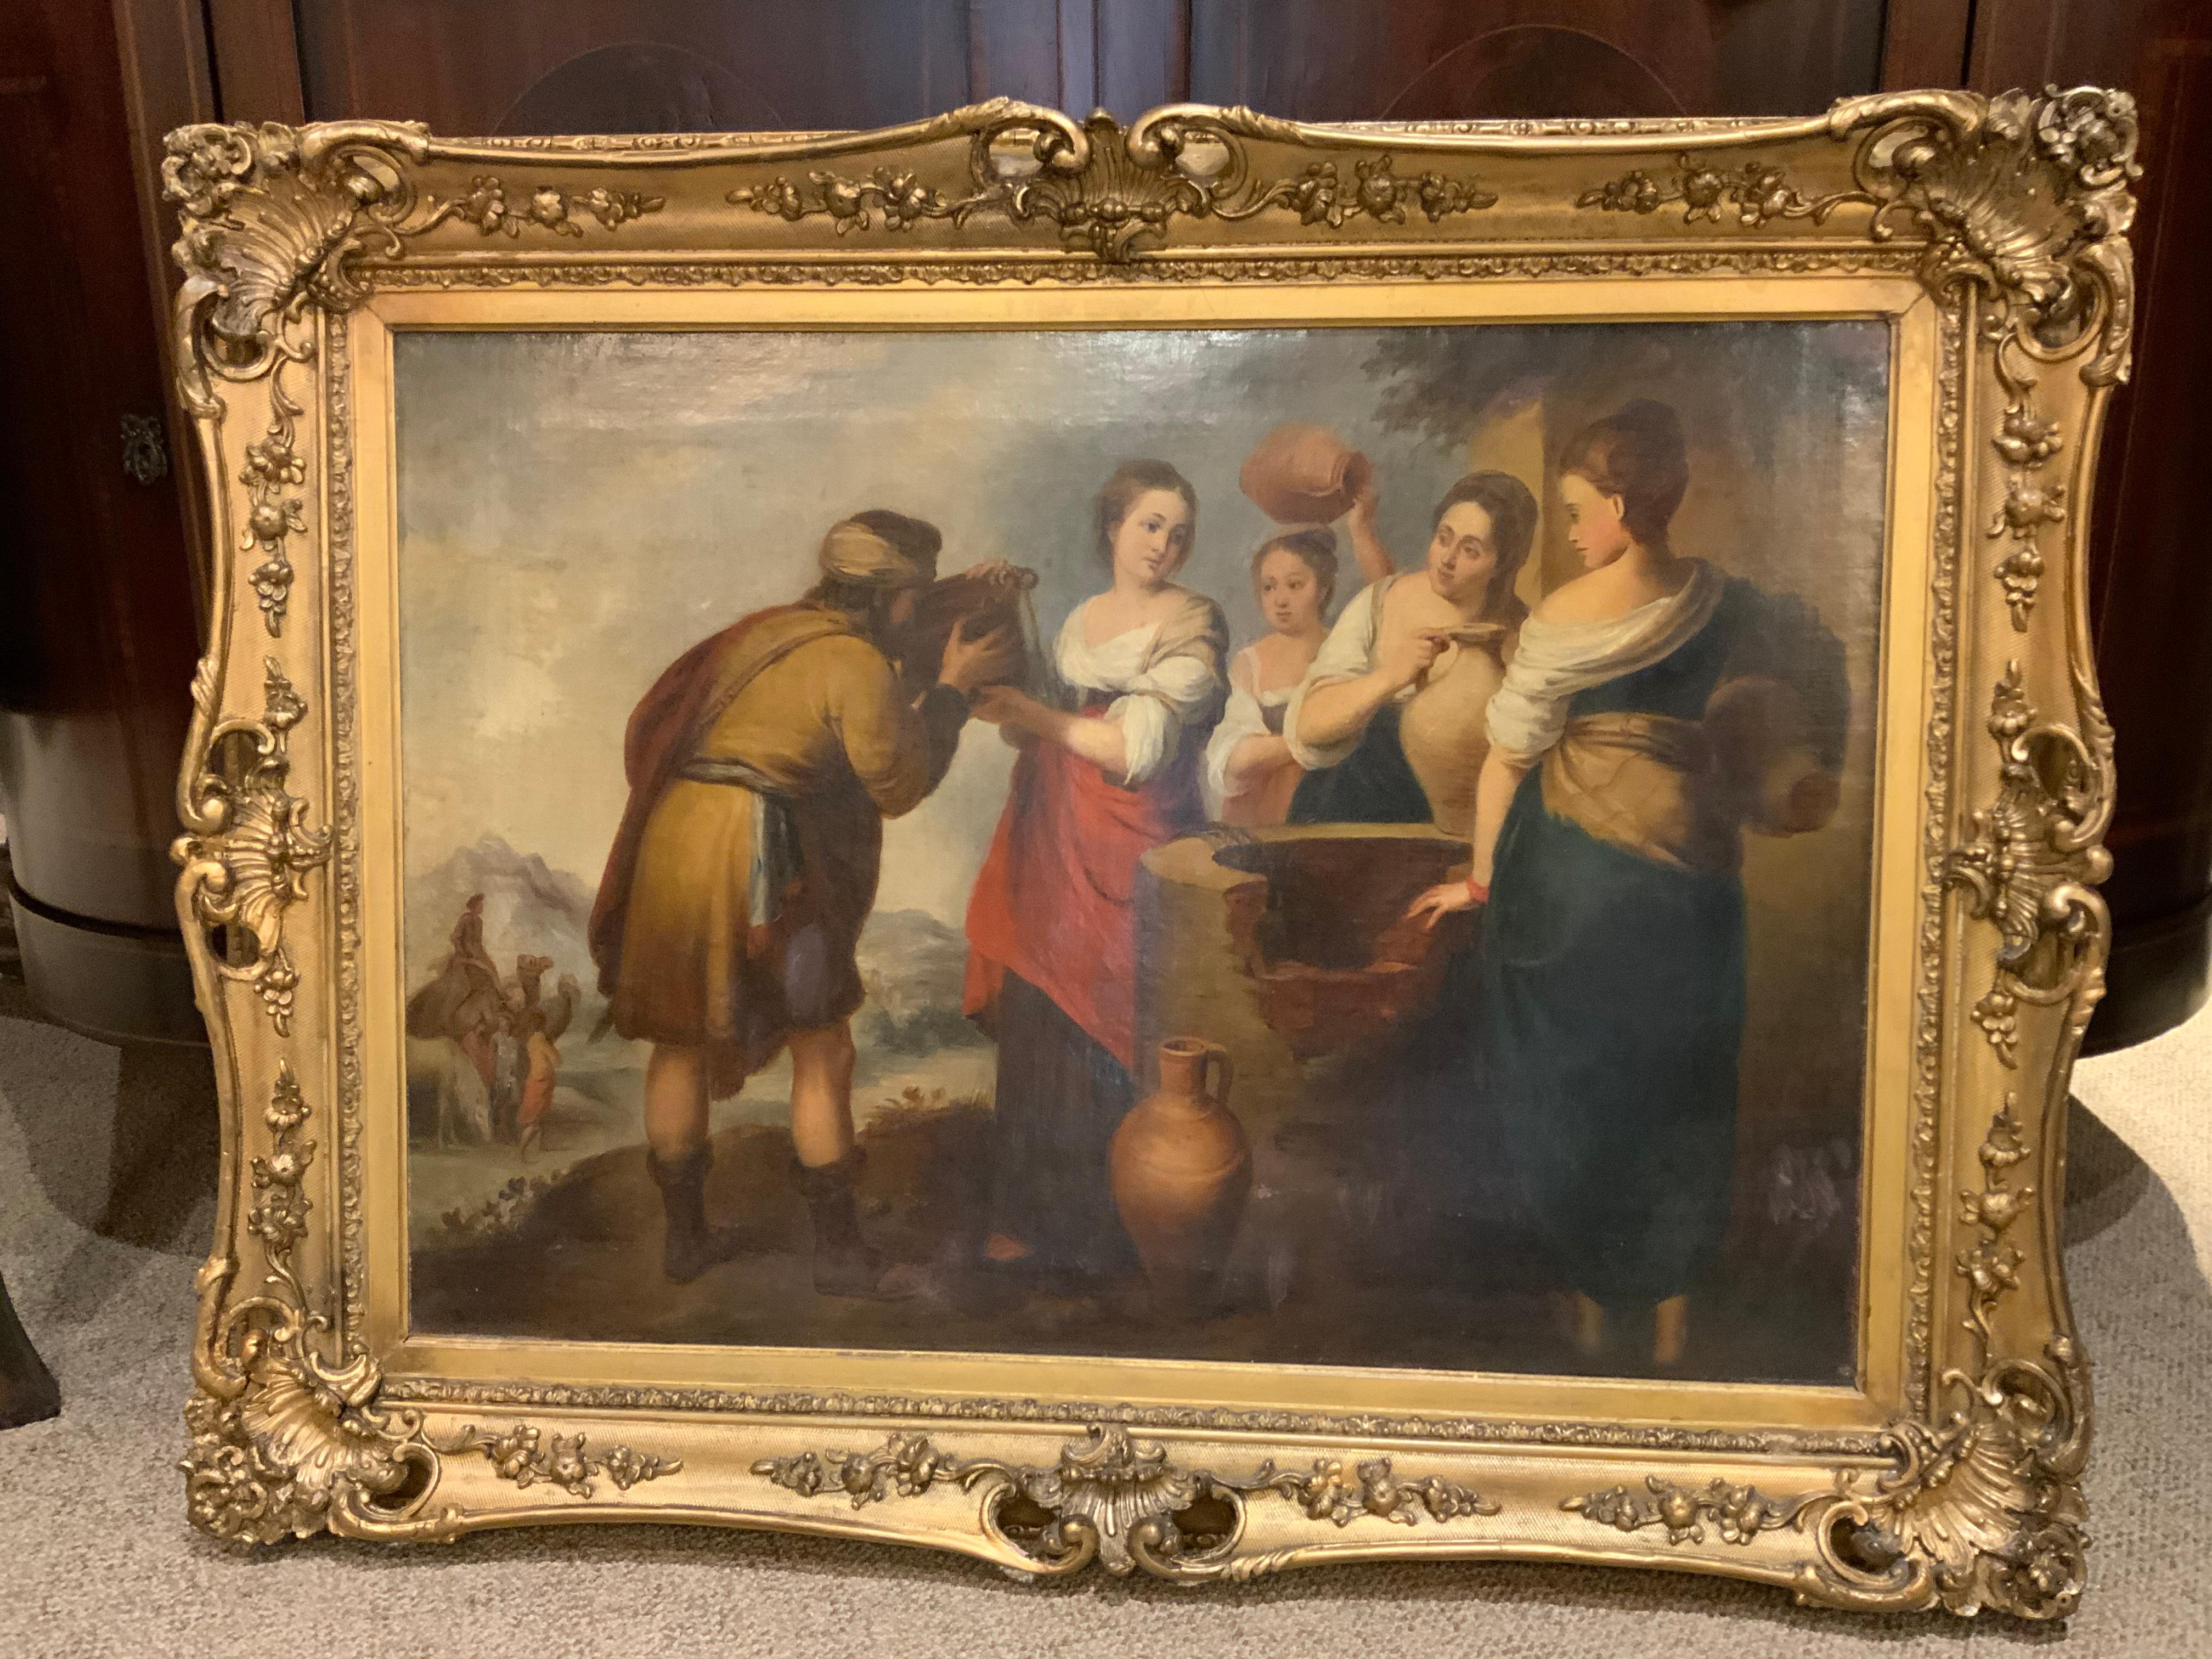 This exquisite painting is rich in color exhibiting age and great
Quality. It is framed in a gilt baroque antique frame. The artist is
Portraying the story of Rebecca and Eliezer at the well. She is offering
Him water as he has traveled a great